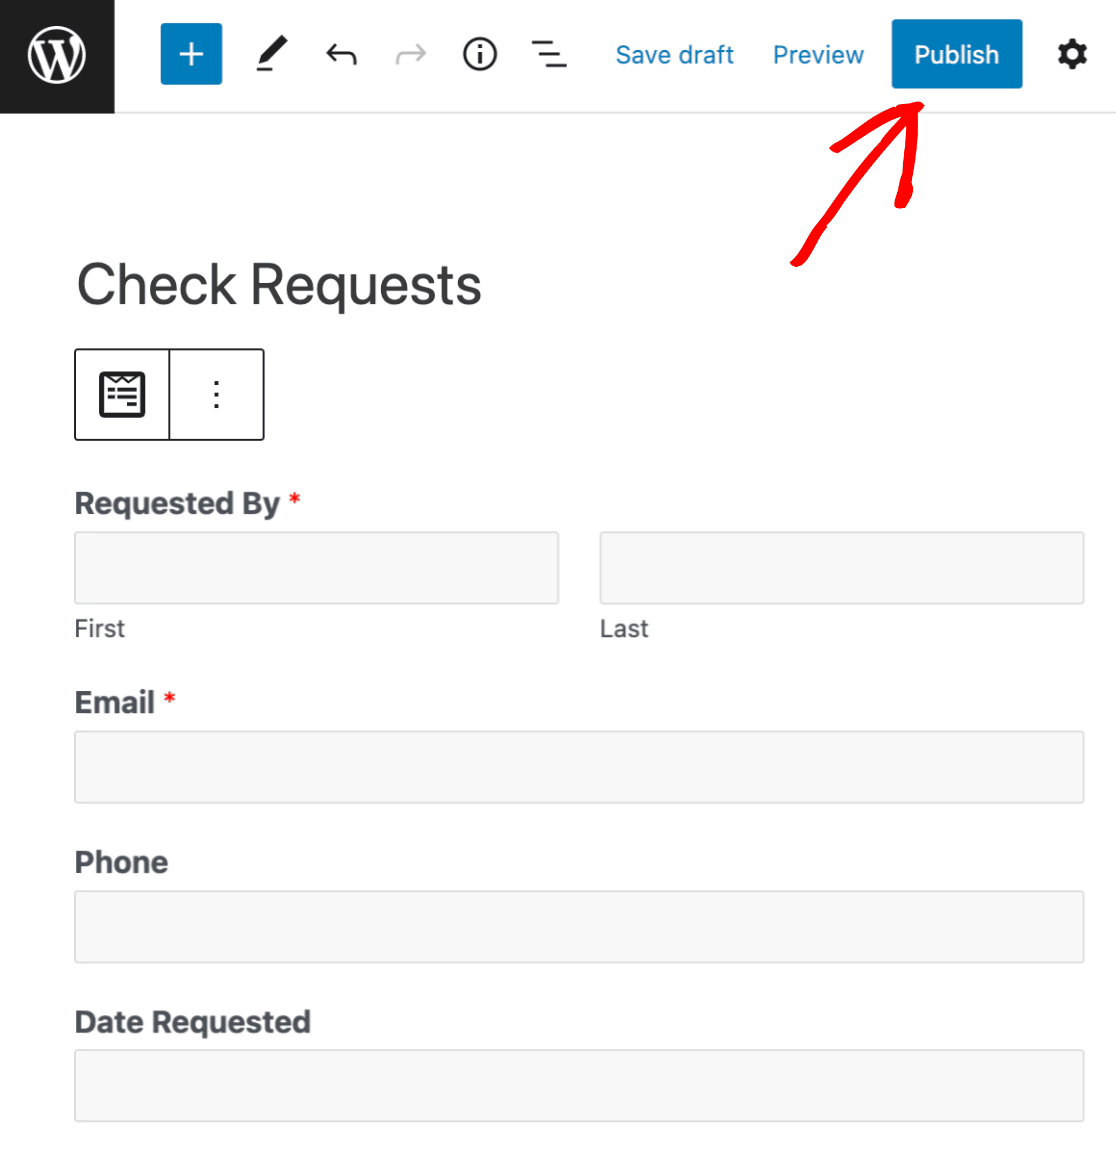 Publishing your check request form